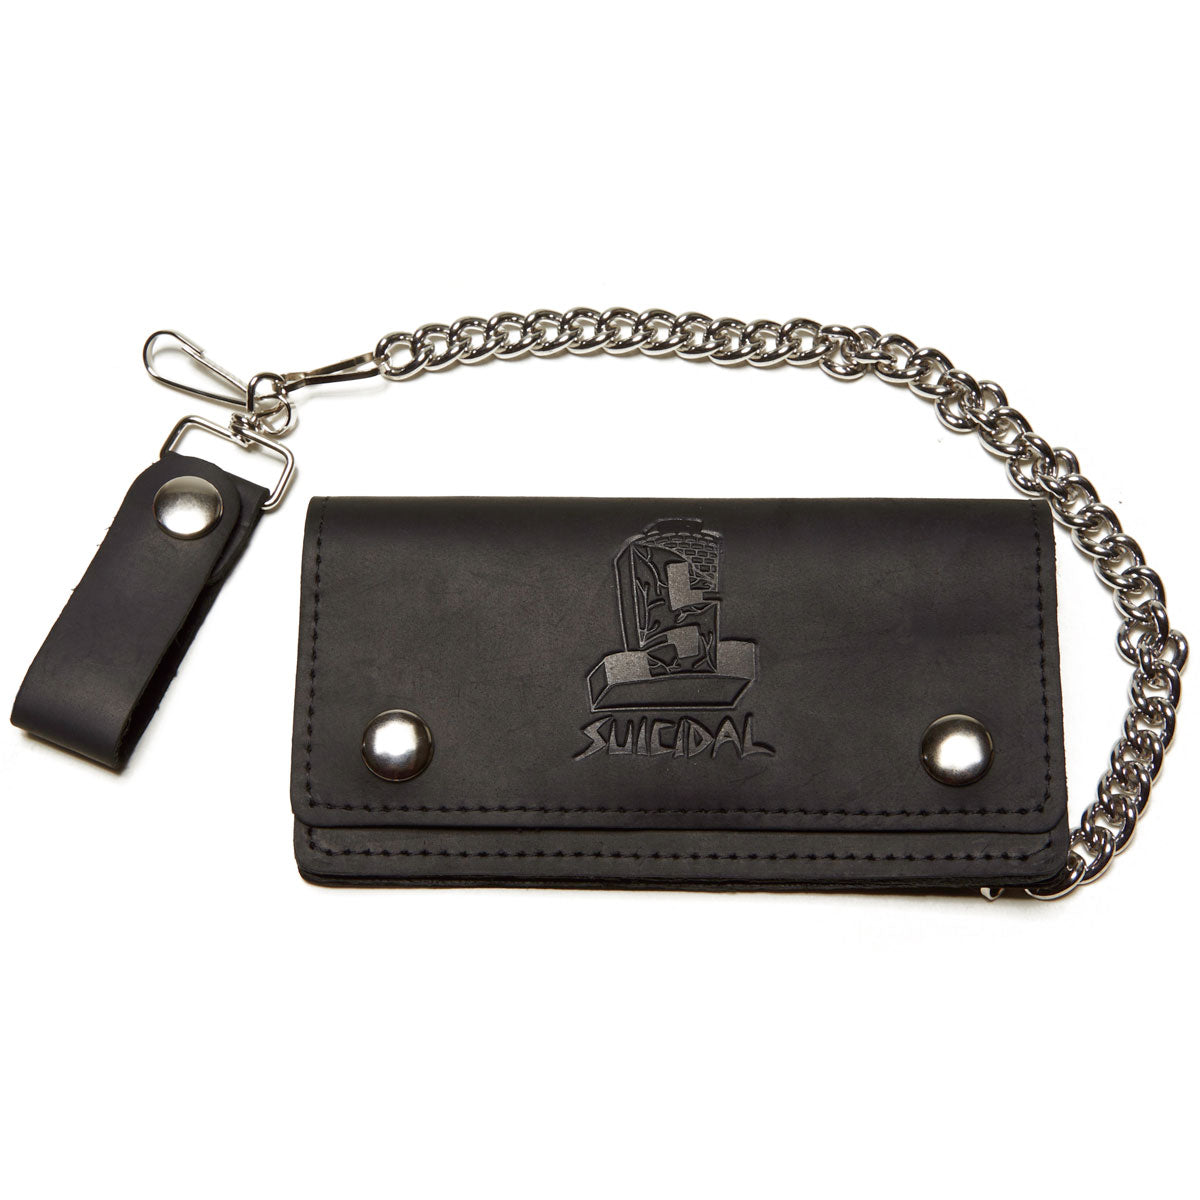 Dogtown Suicidal Large Leather Chain Wallet - Black image 1